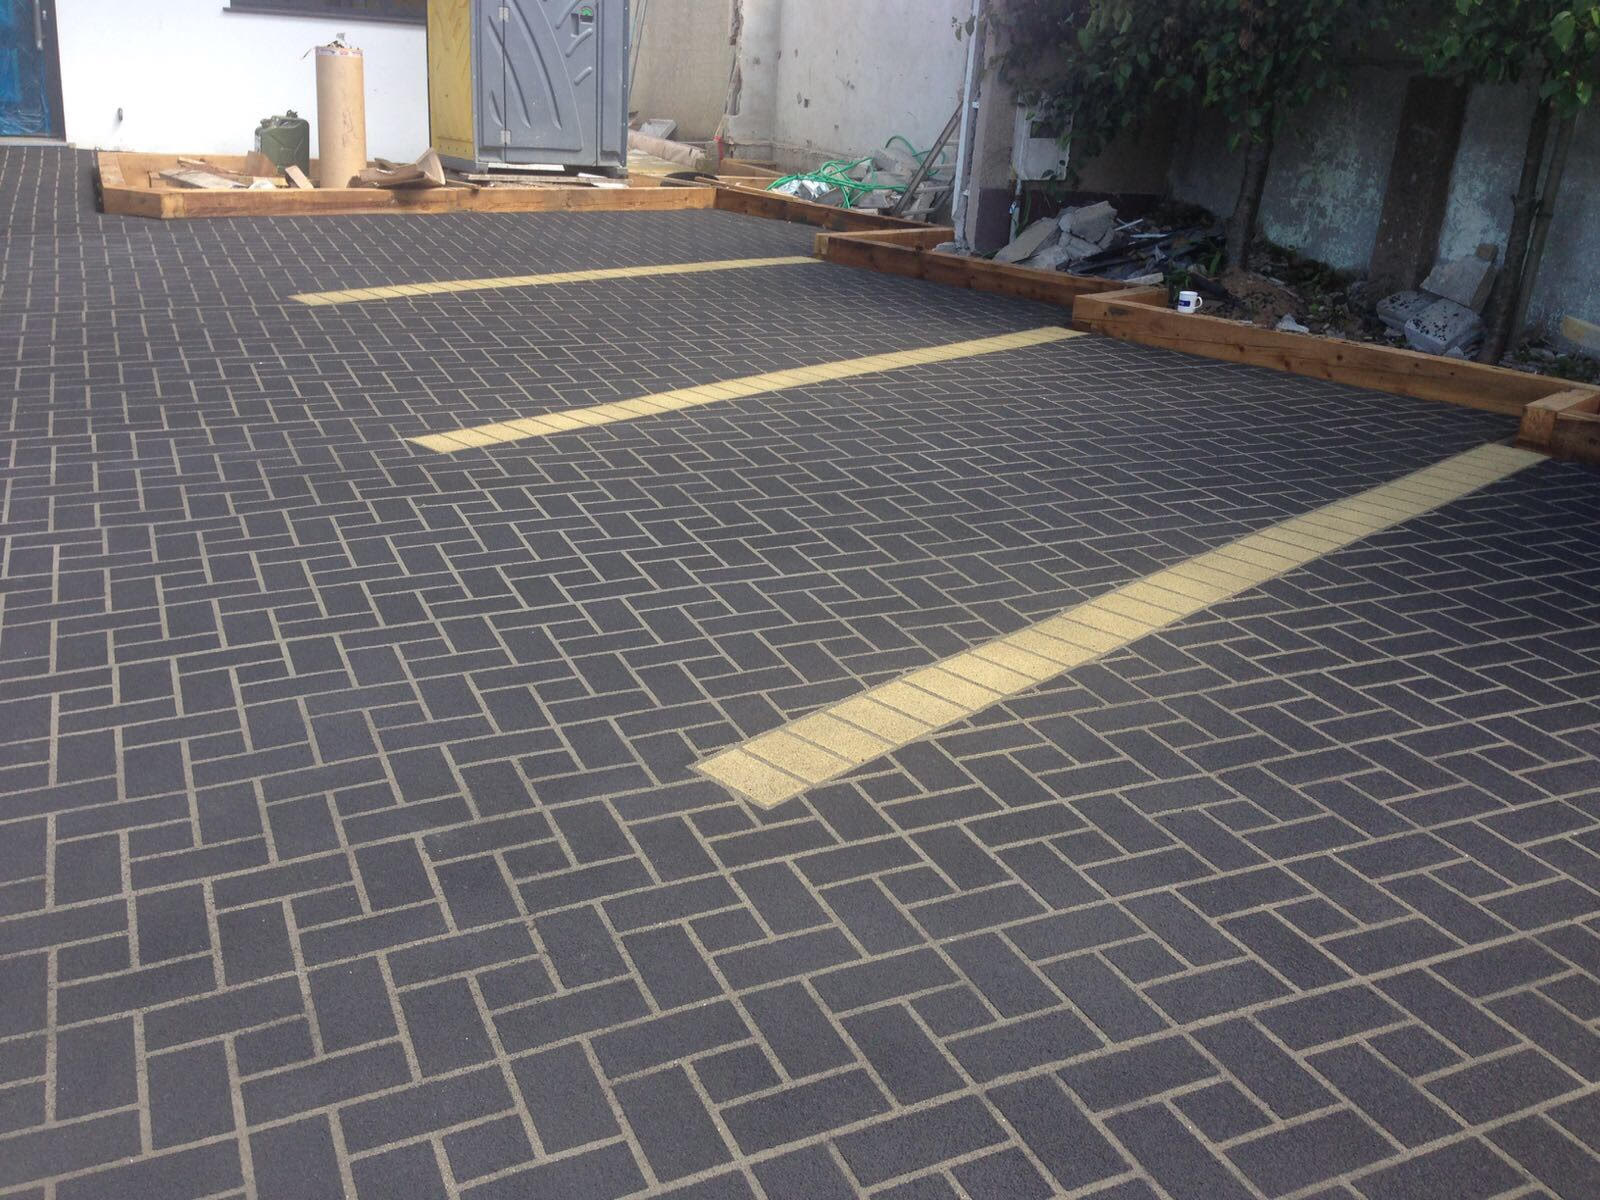 Driveway Restoration Leicestershire - Prestige Group UK - Based In Leicester